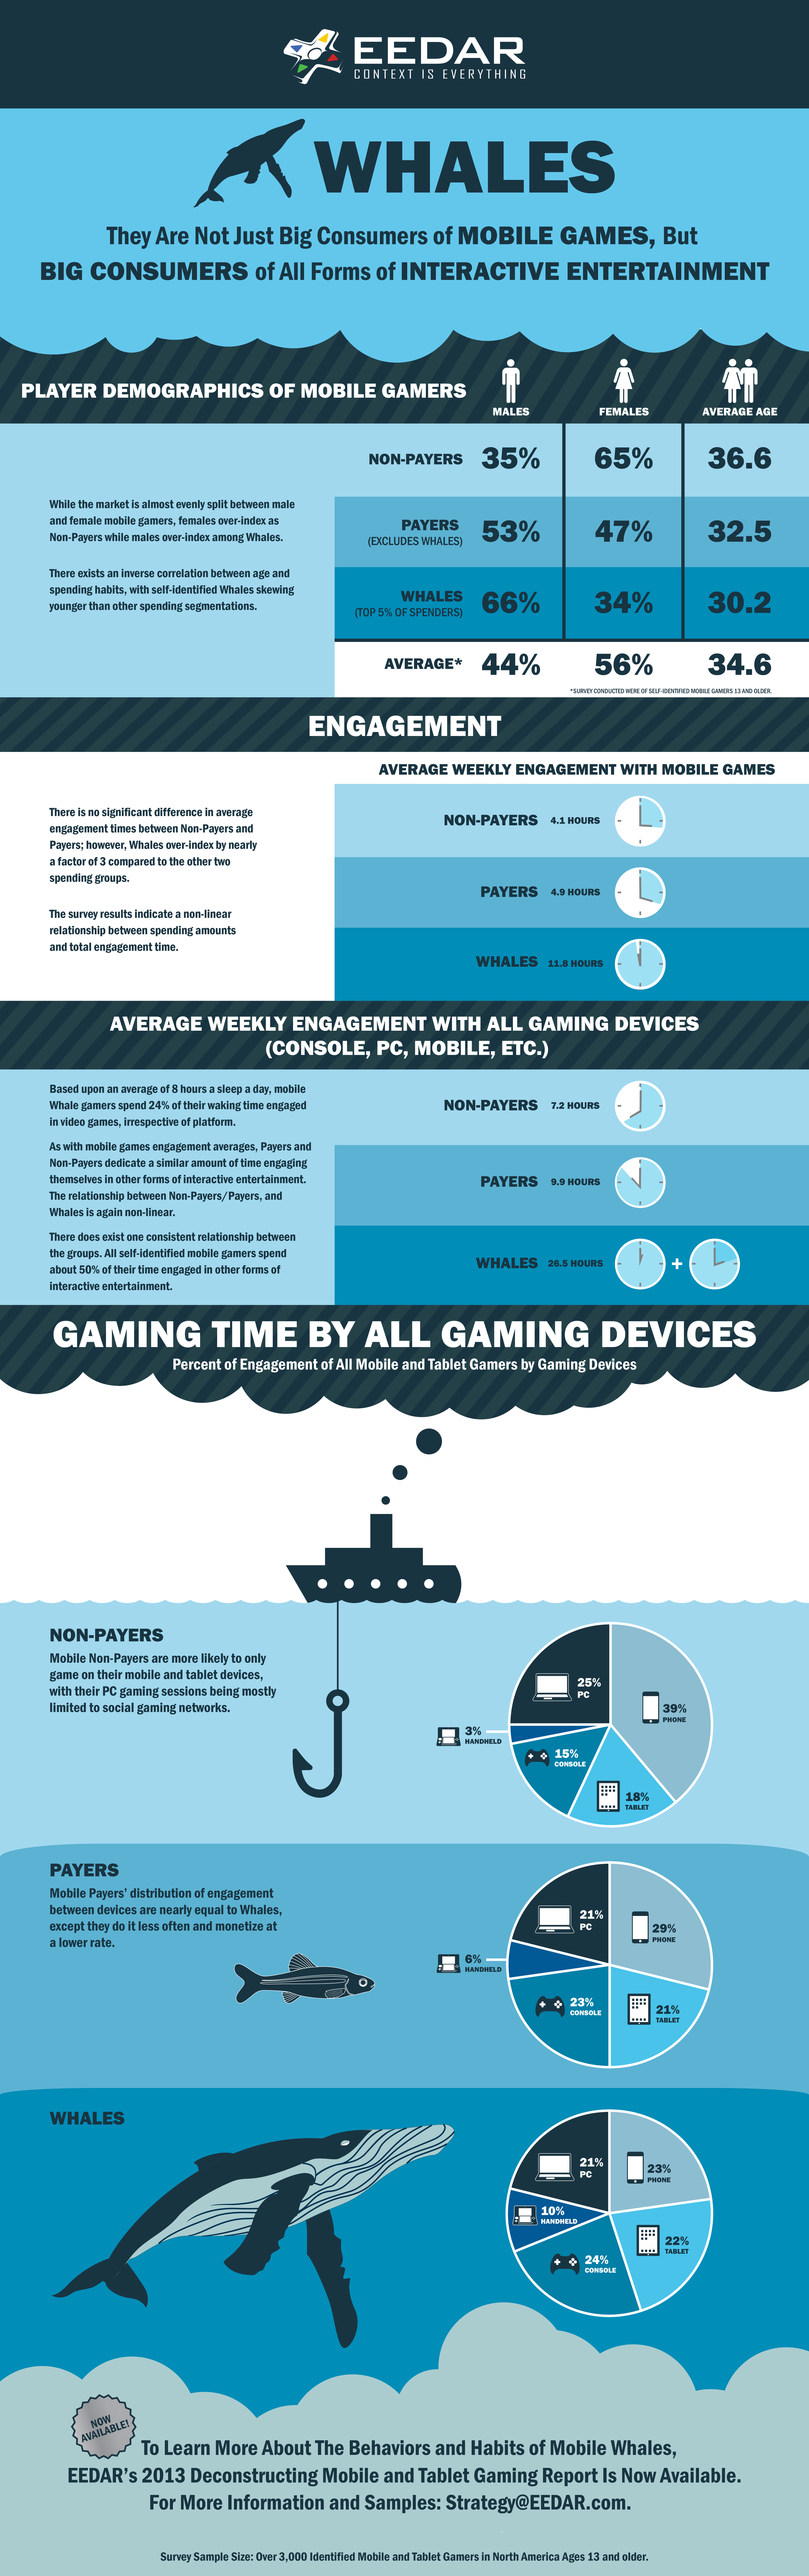 Who Are The ‘Whales’ Driving Free-to-Play Gaming? You’d Be Surprised